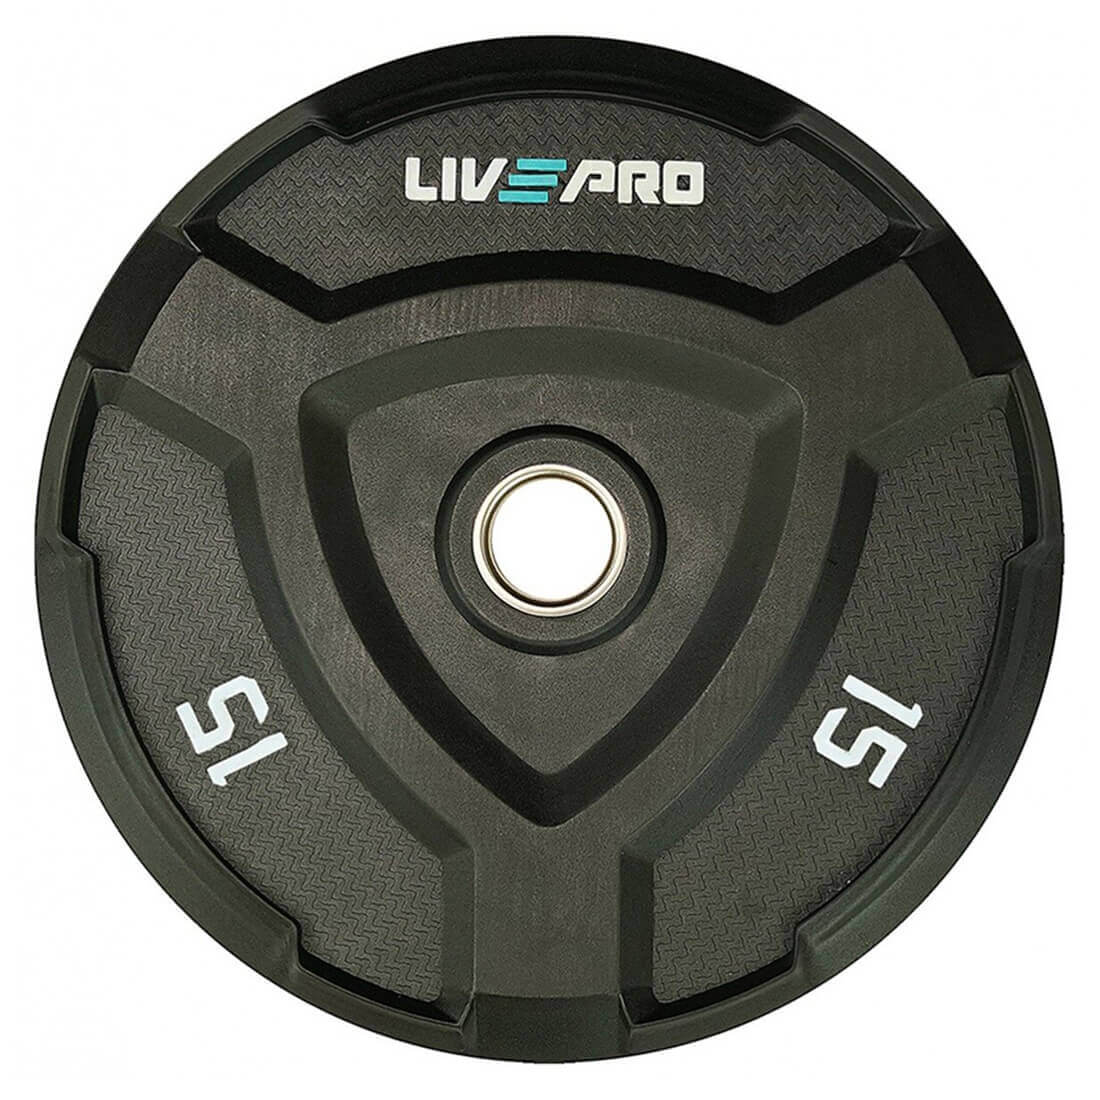 Livepro Rubber Bumper Plates - Sold As Pair (10 to 25kg)